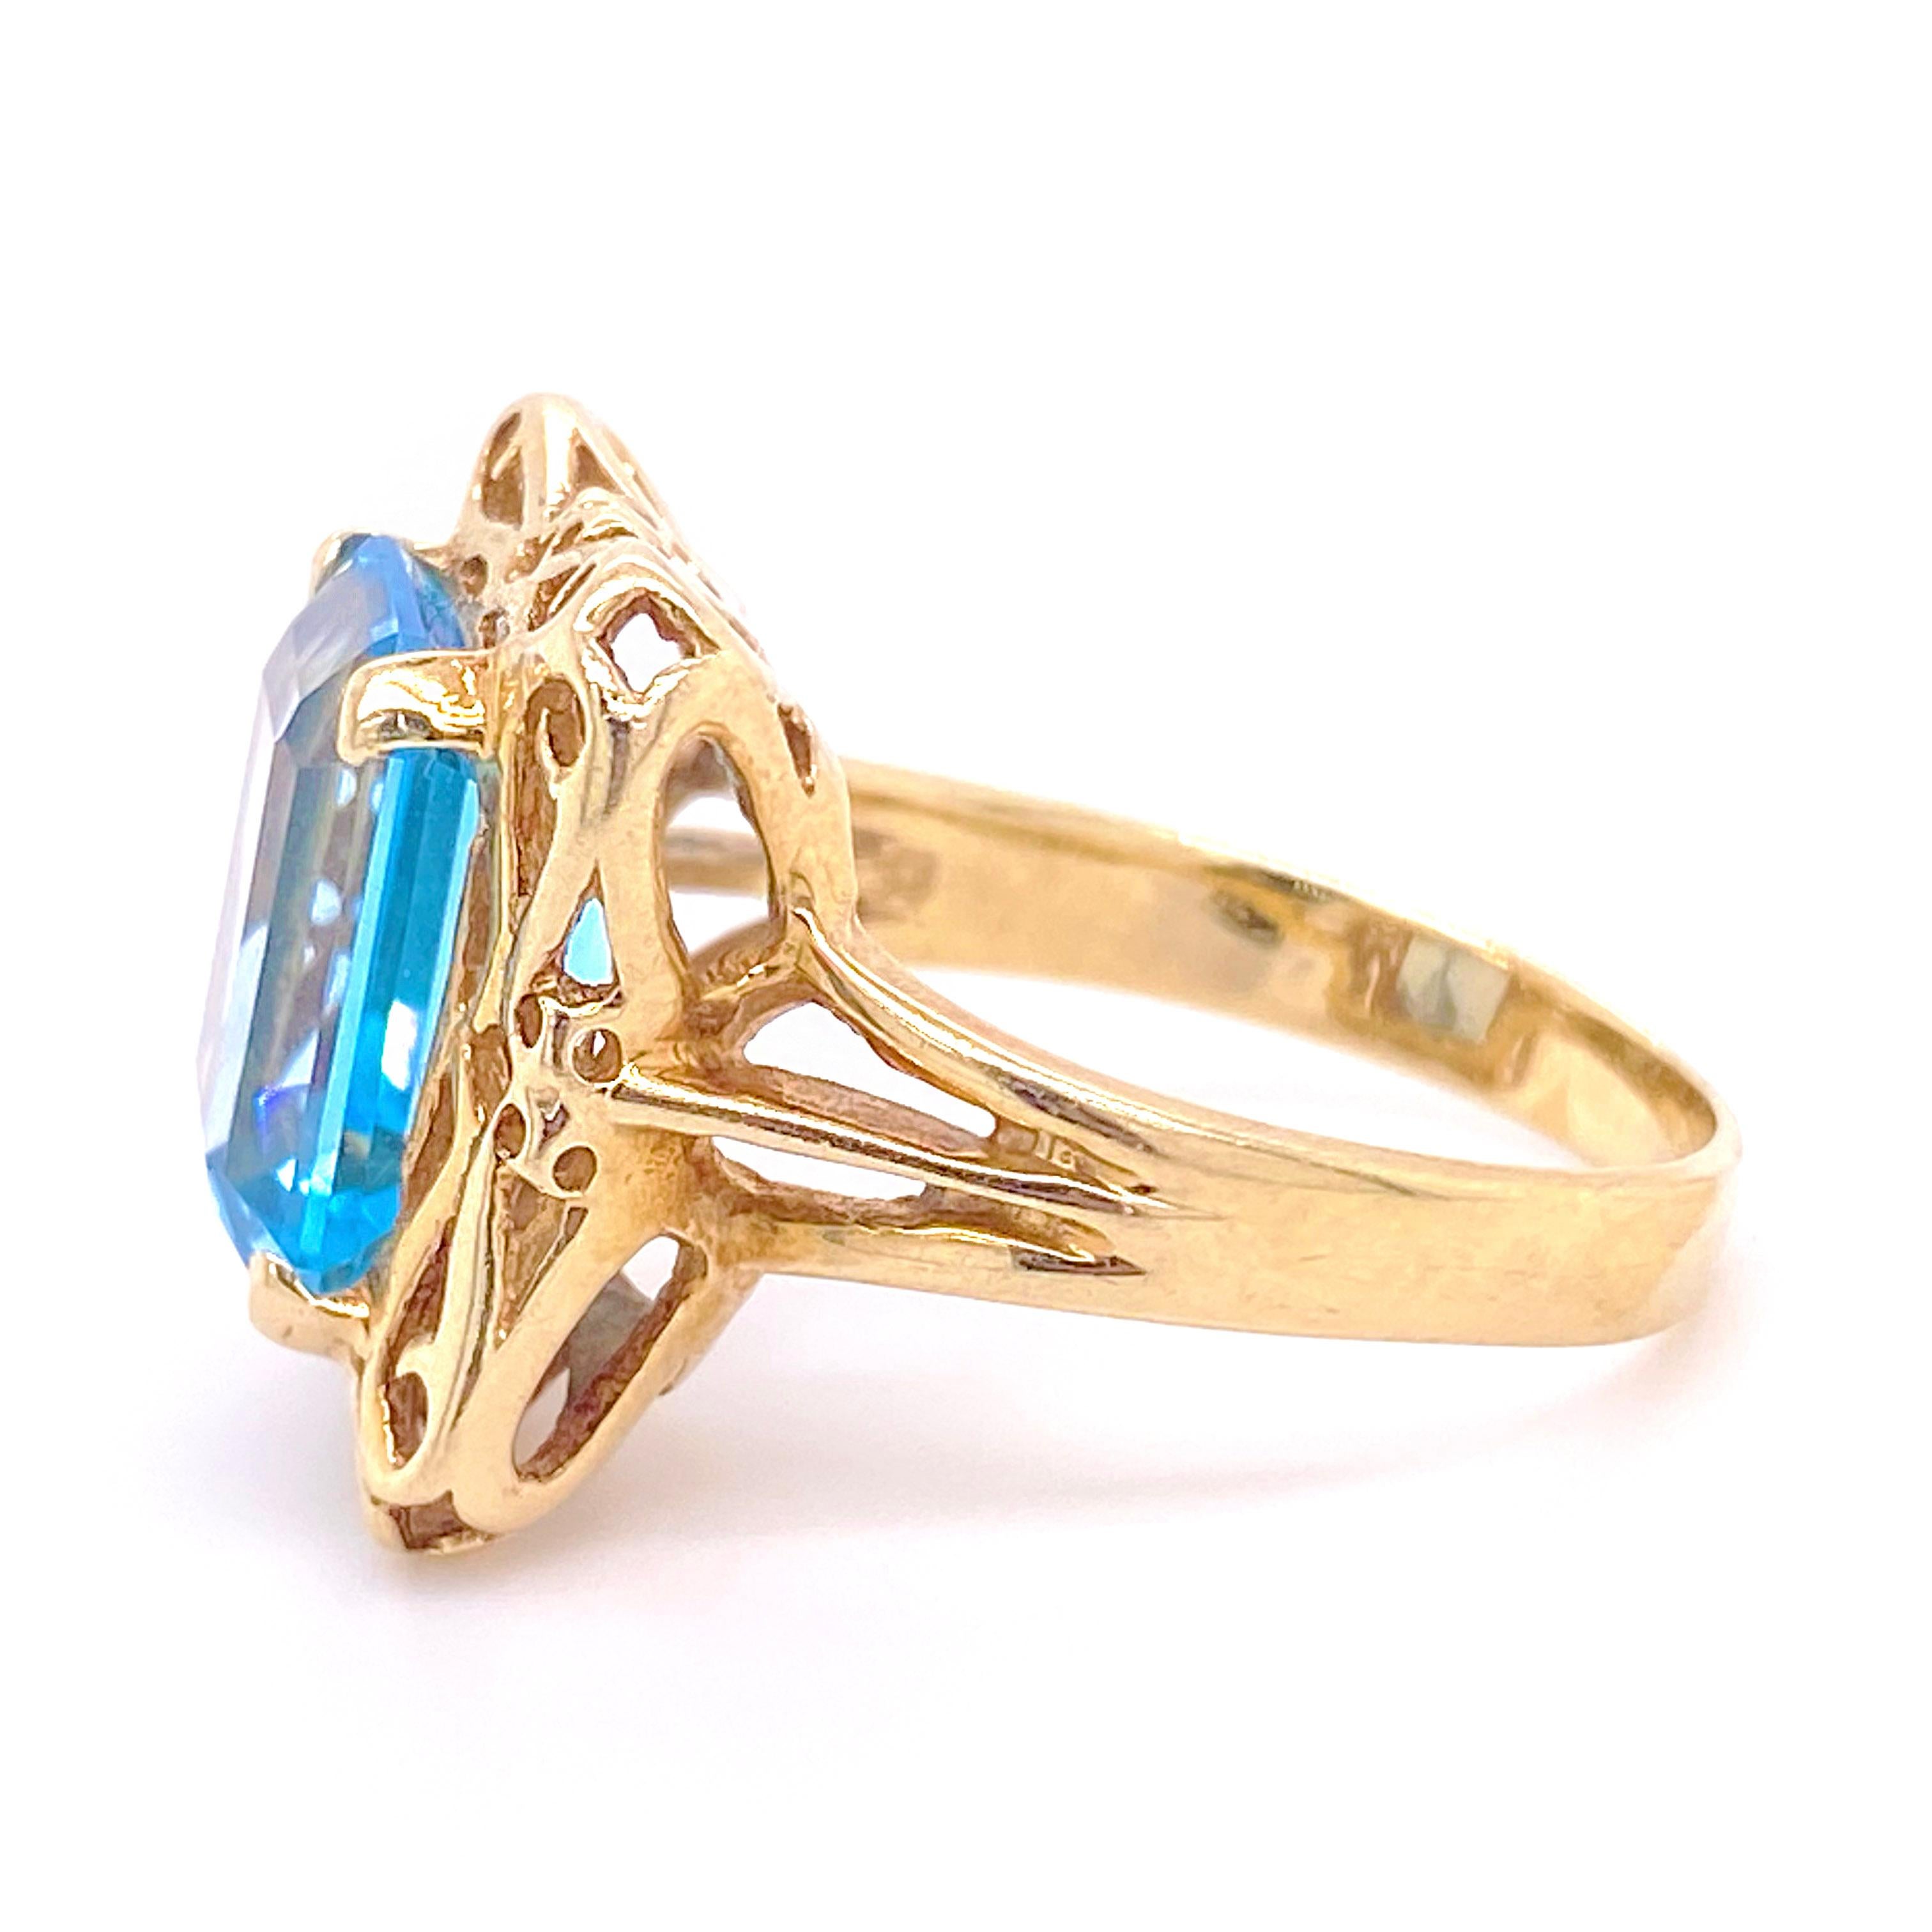 The emerald cut blue topaz ring has 3.62 carats! This ring has lots of luscious 14 karat gold on it and is a filigree design. The ring is hardy and sturdy with lots of gold to protect the gemstone. The Swiss blue color of the stone makes it a very